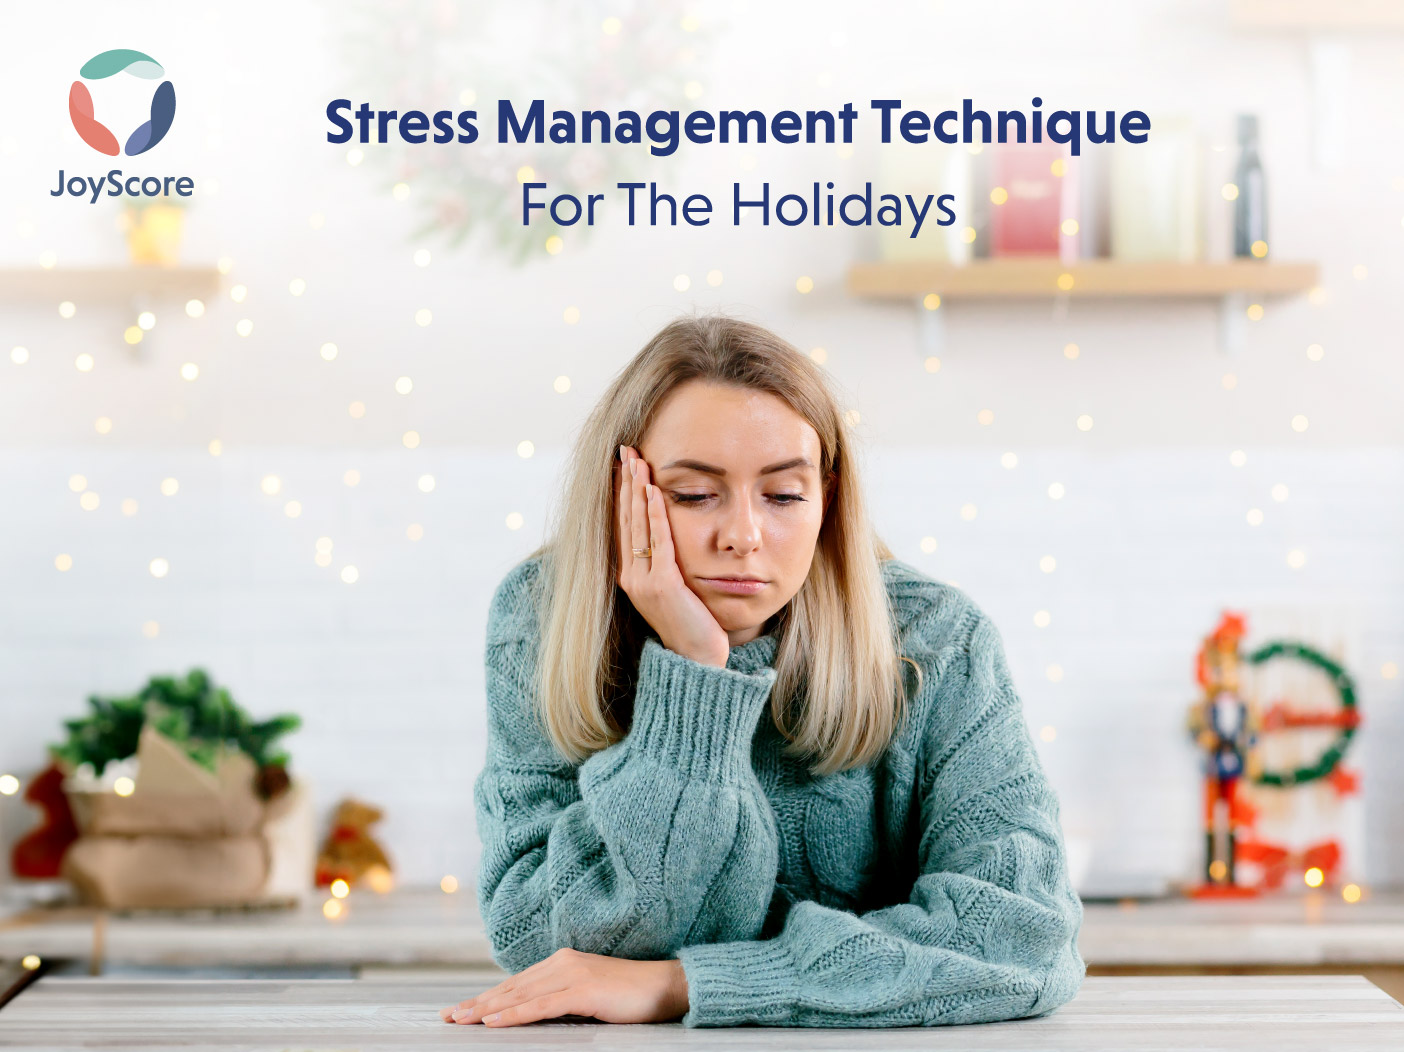 Stress Management Techniques for the Holidays